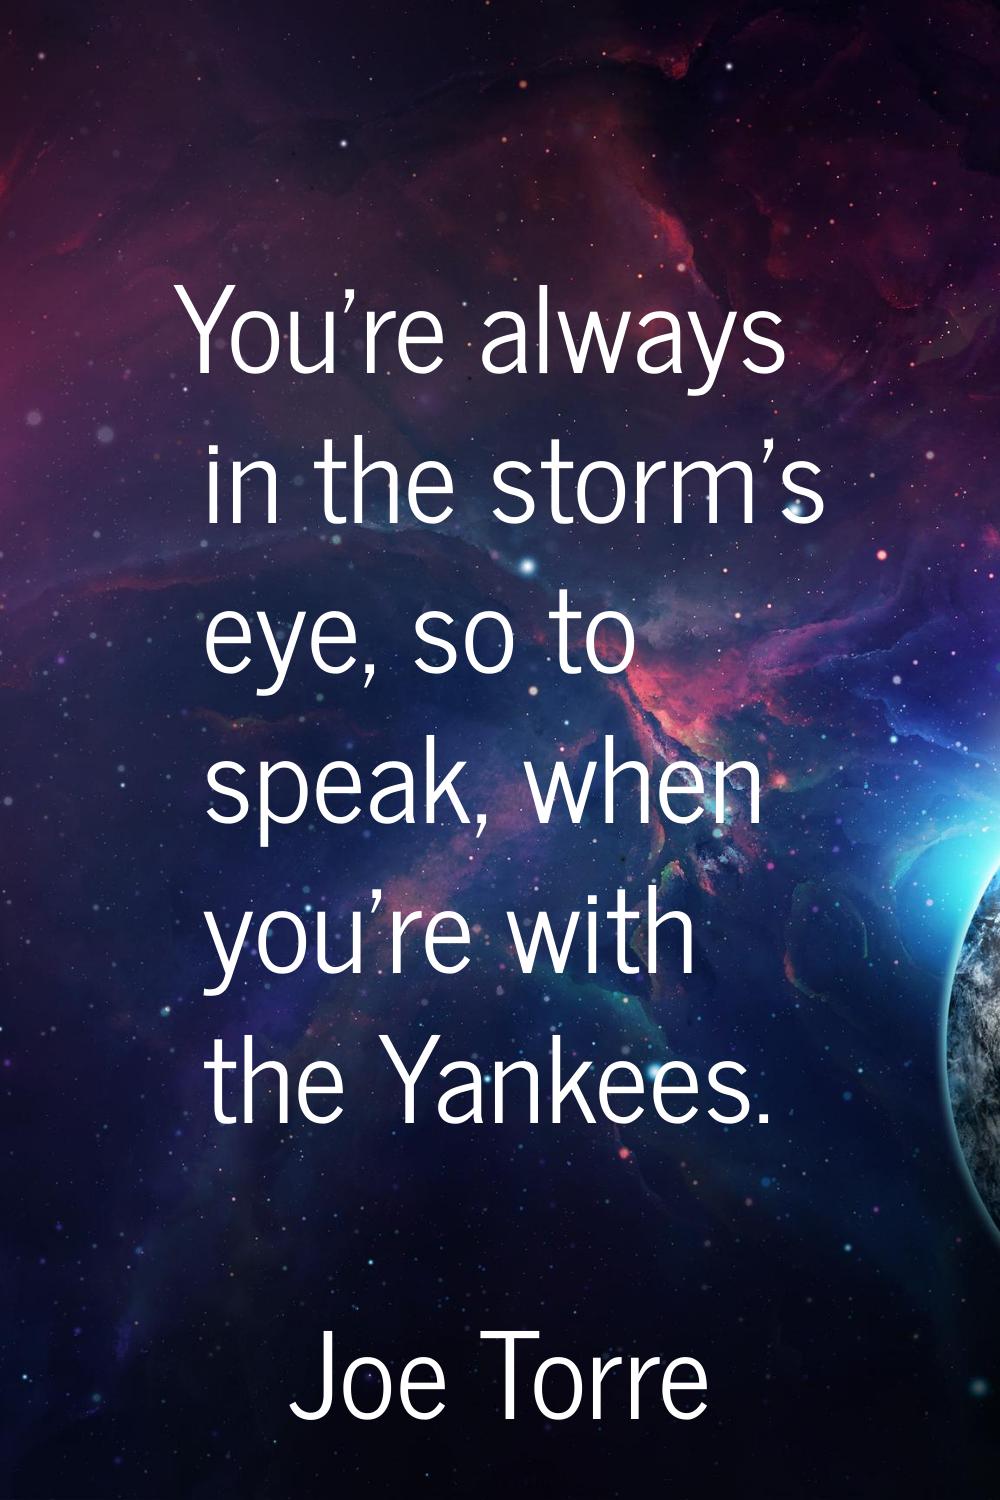 You're always in the storm's eye, so to speak, when you're with the Yankees.